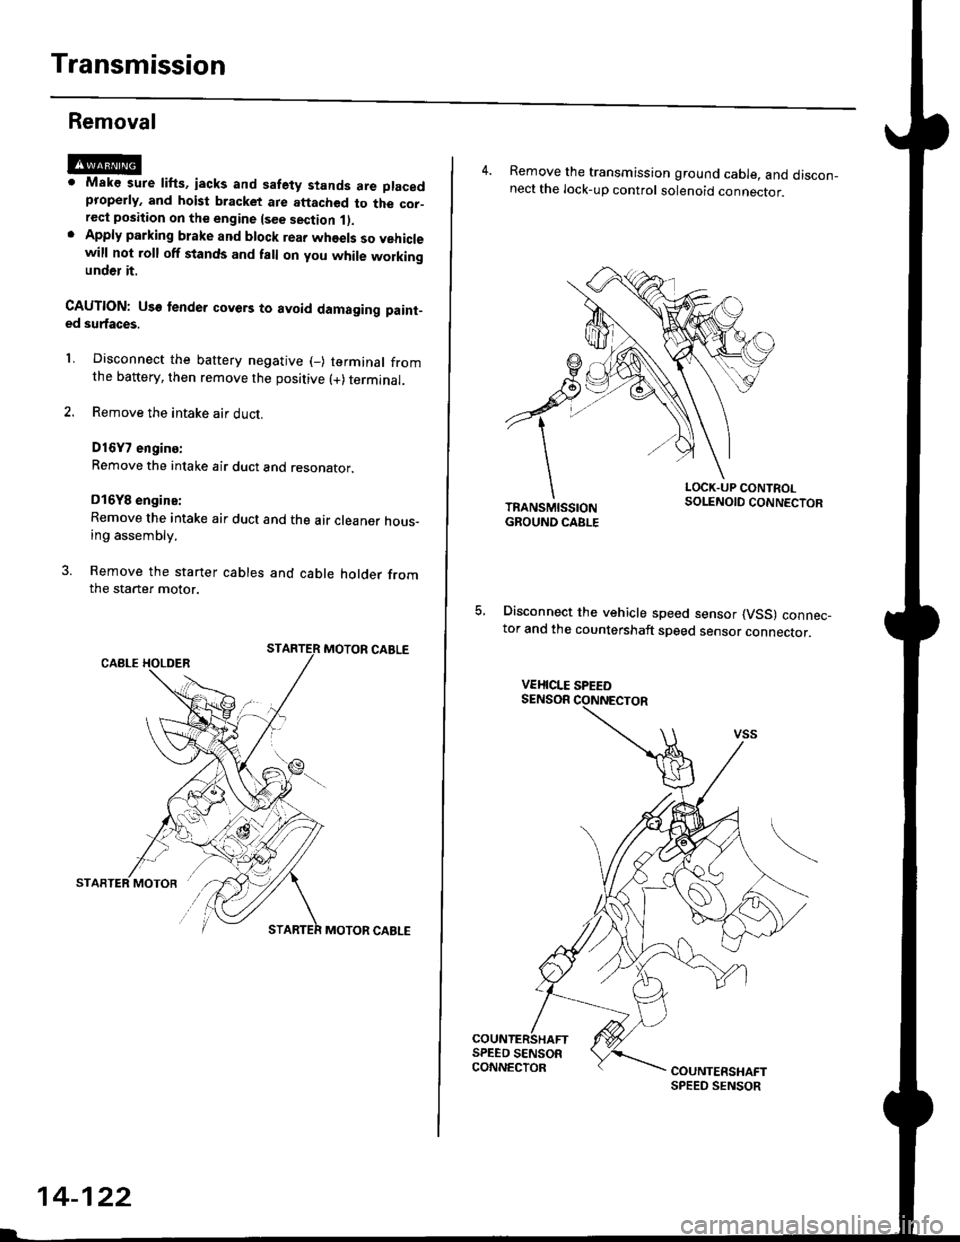 HONDA CIVIC 1997 6.G Workshop Manual Transmission
Removal
@Maks sure lifts, iacks and safety stands are placedproperly, and hoist bracket ate aftached to the cor_rec{ position on the engine lsee section 1).Apply parking brake and block r